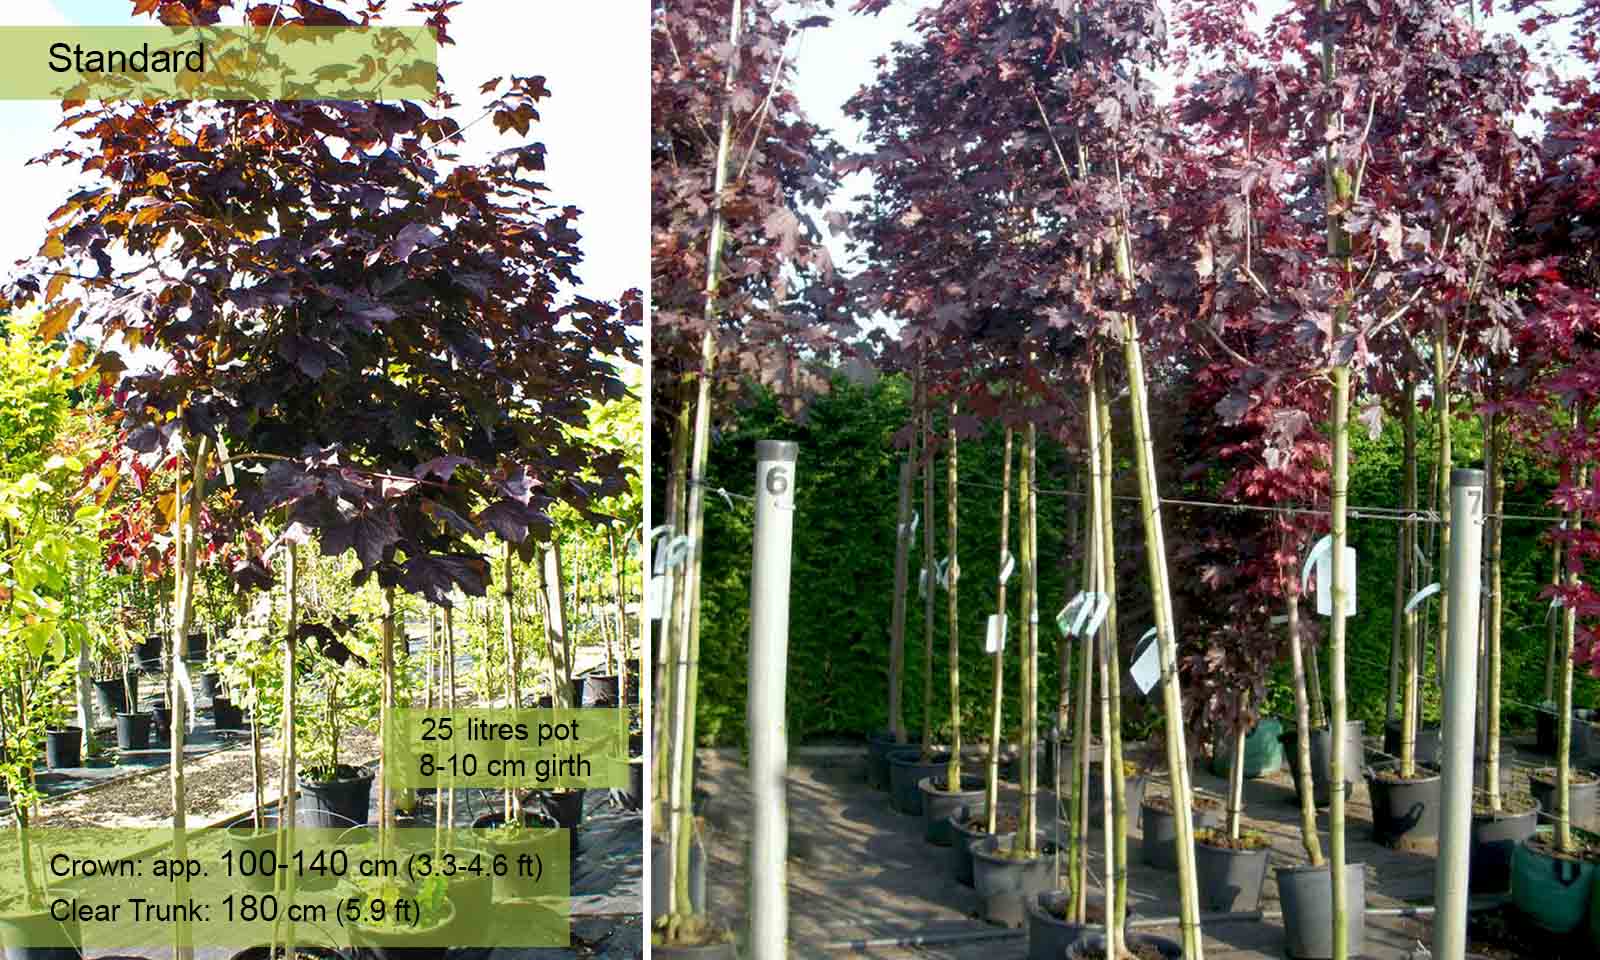 Acer Platanoides Royal Red (Norway Maple) - Standard